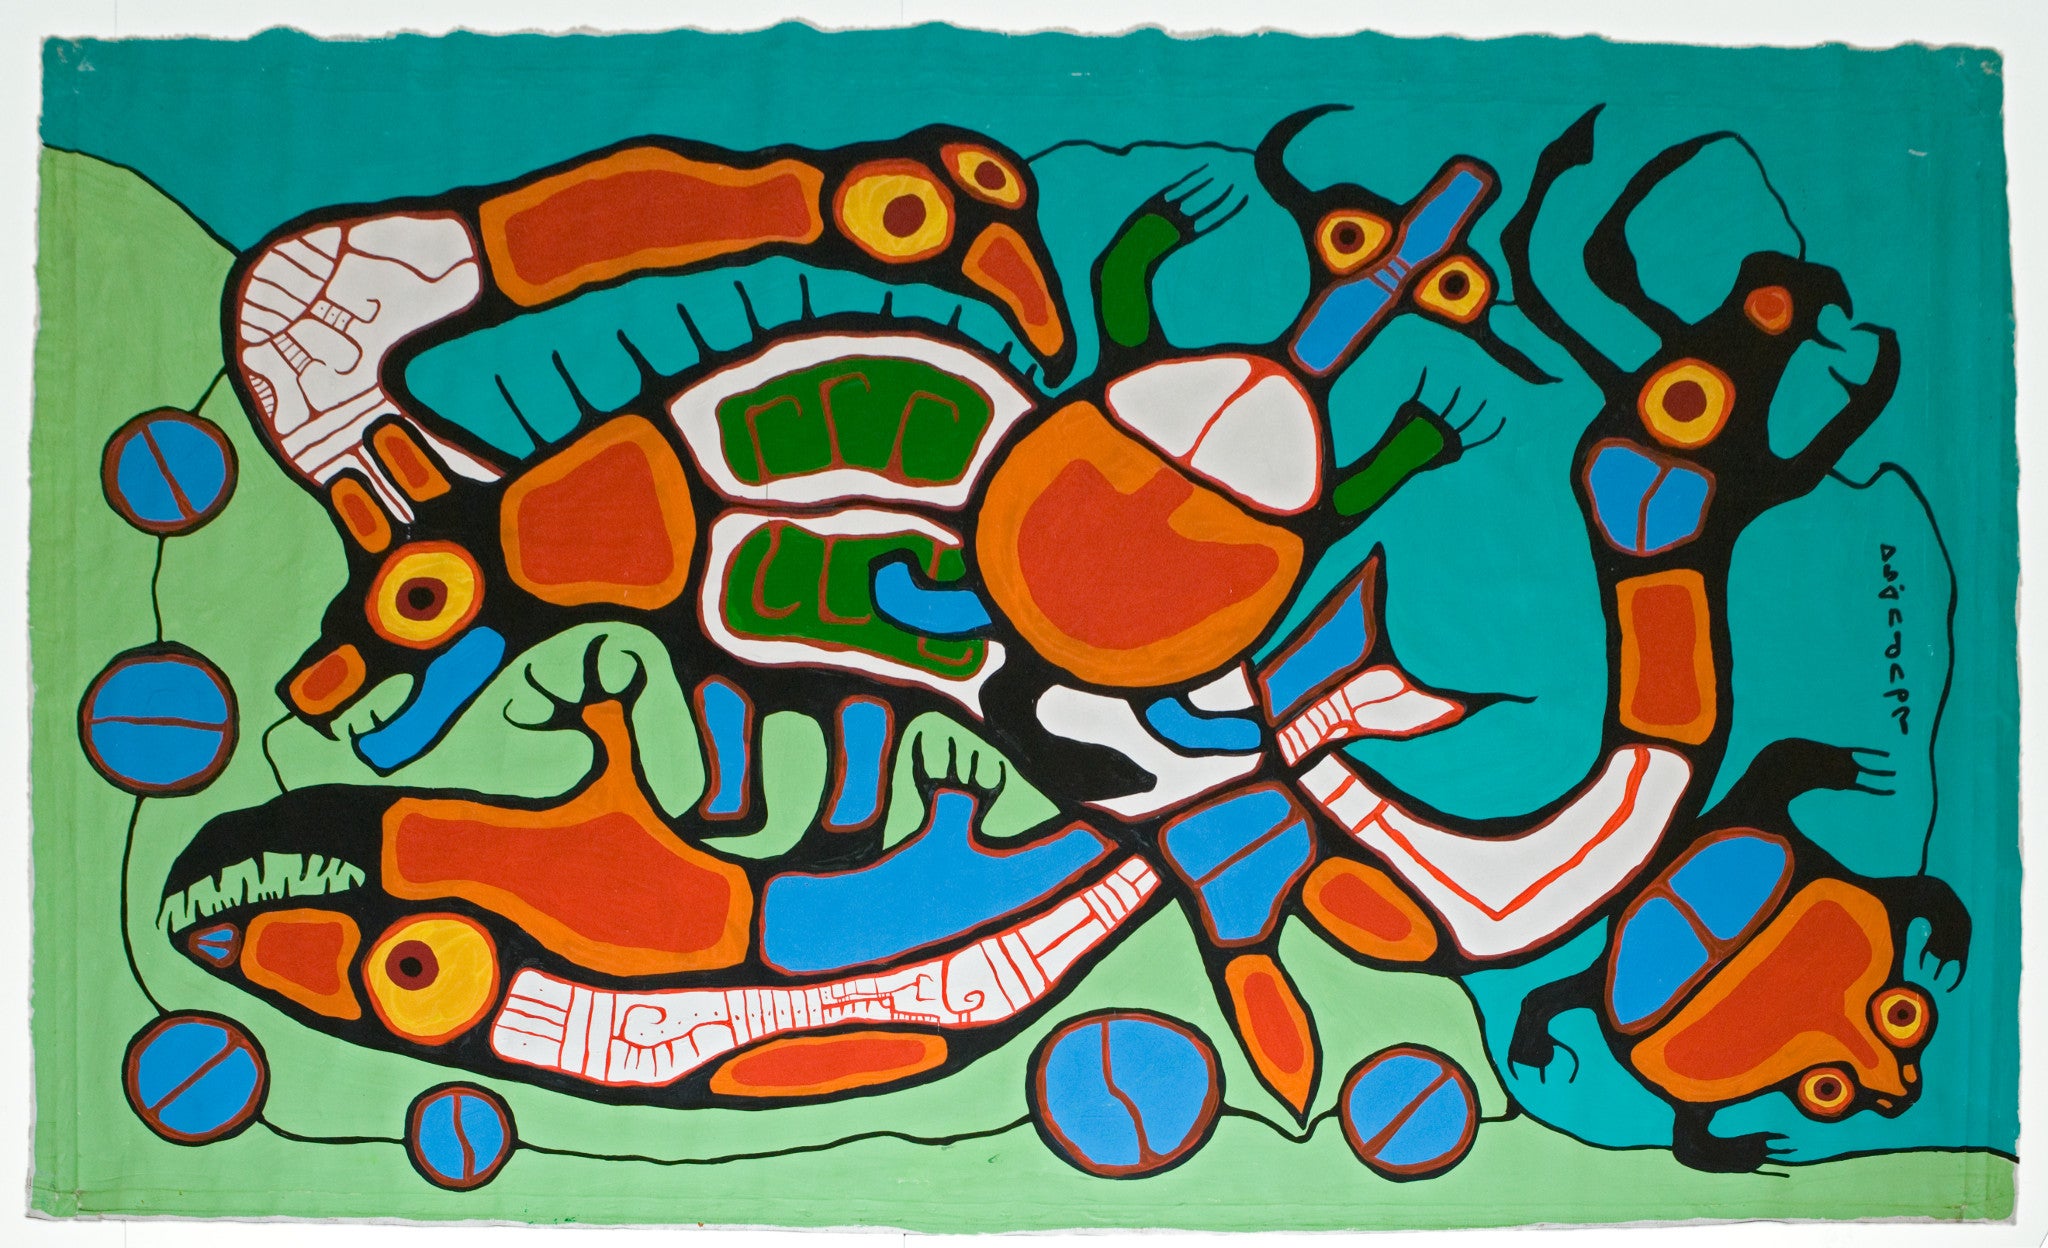 Norval Morrisseau, Cycles, ca. 1985. Acrylic on Canvas. Detroit Institute of Arts.